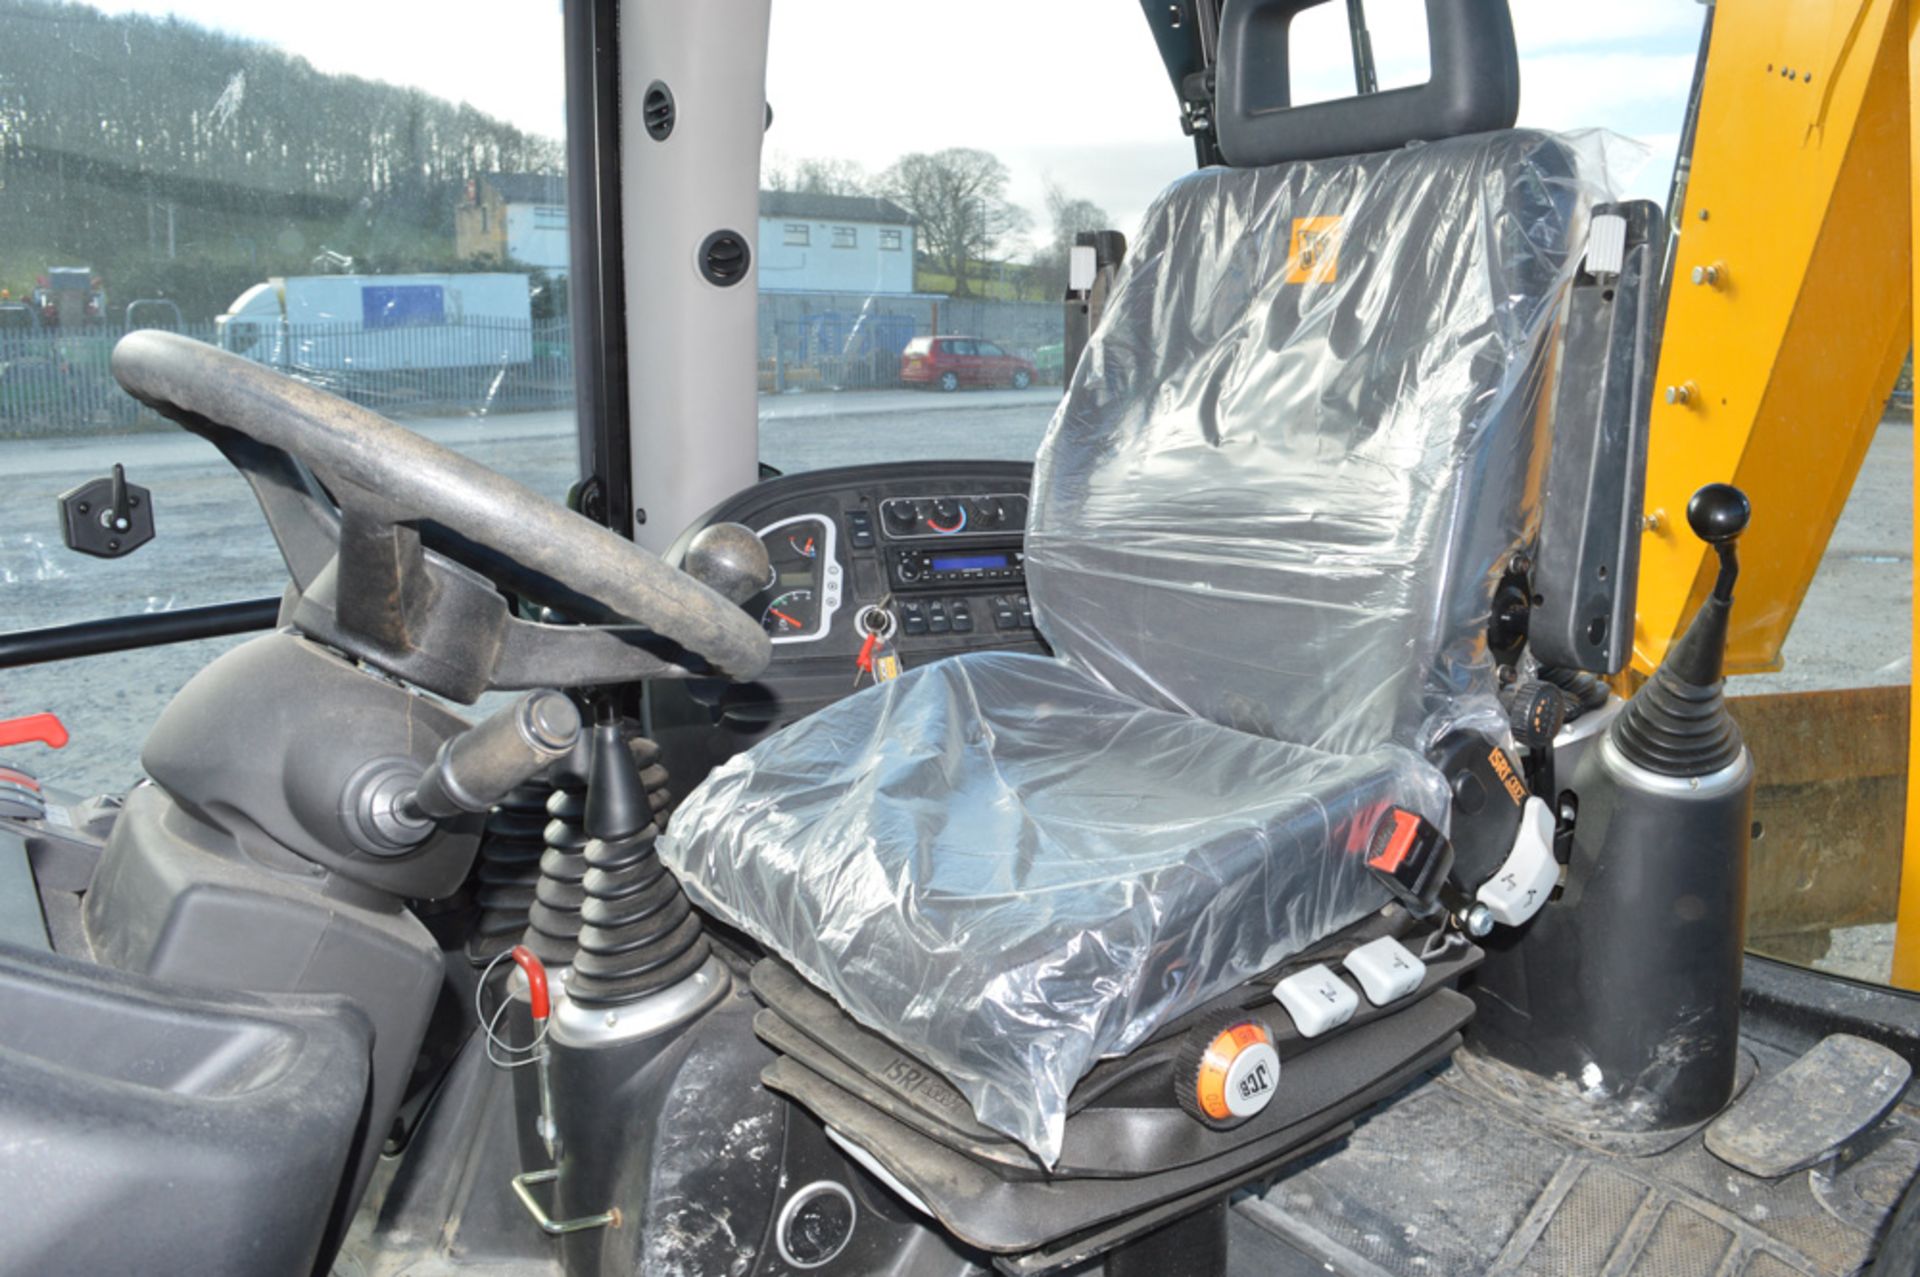 JCB 4CX Contractor backhoe loader Year: 2014 S/N: 2269627 Recorded Hours: 78 - Image 15 of 17